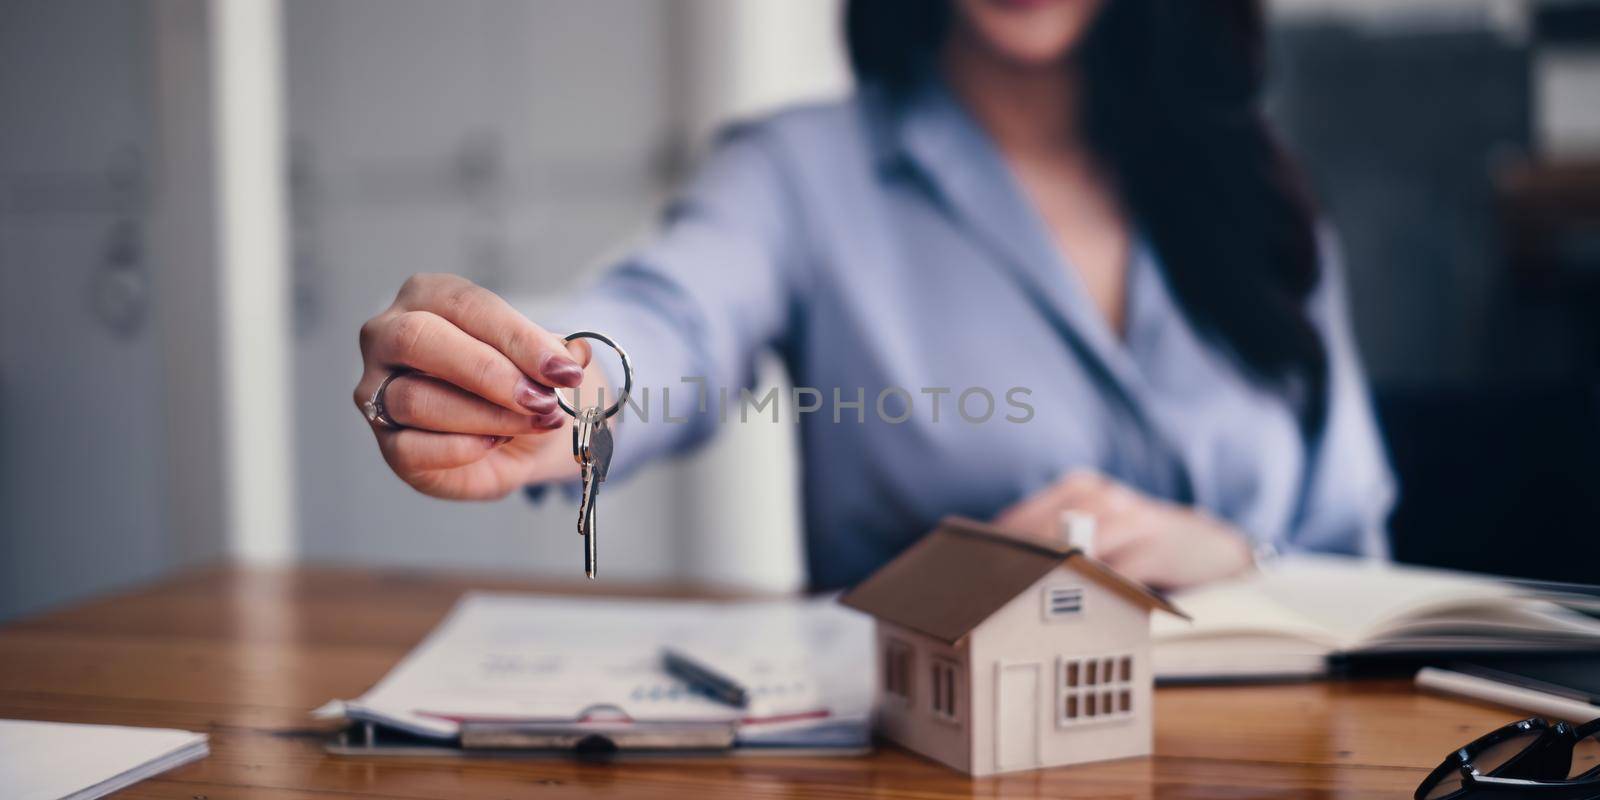 Real estate or broker residential or Agent showing key for house and car rent.